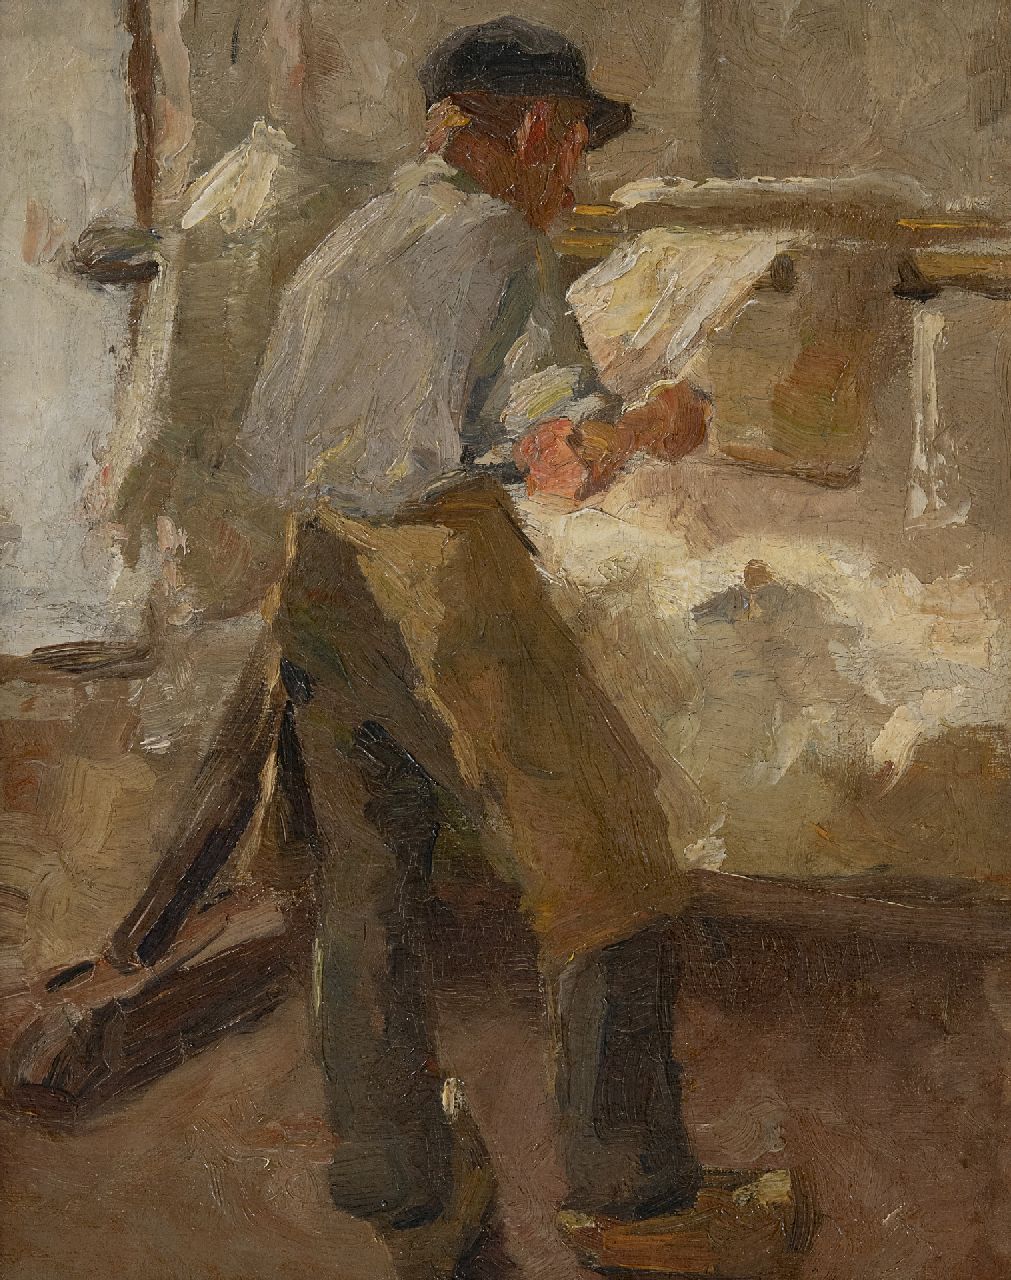 Rappard A.G.A. van | 'Anthon' Gerhard Alexander van Rappard | Paintings offered for sale | Young workman at a stretching frame, oil on canvas 33.1 x 26.3 cm, painted ca. 1890-1891